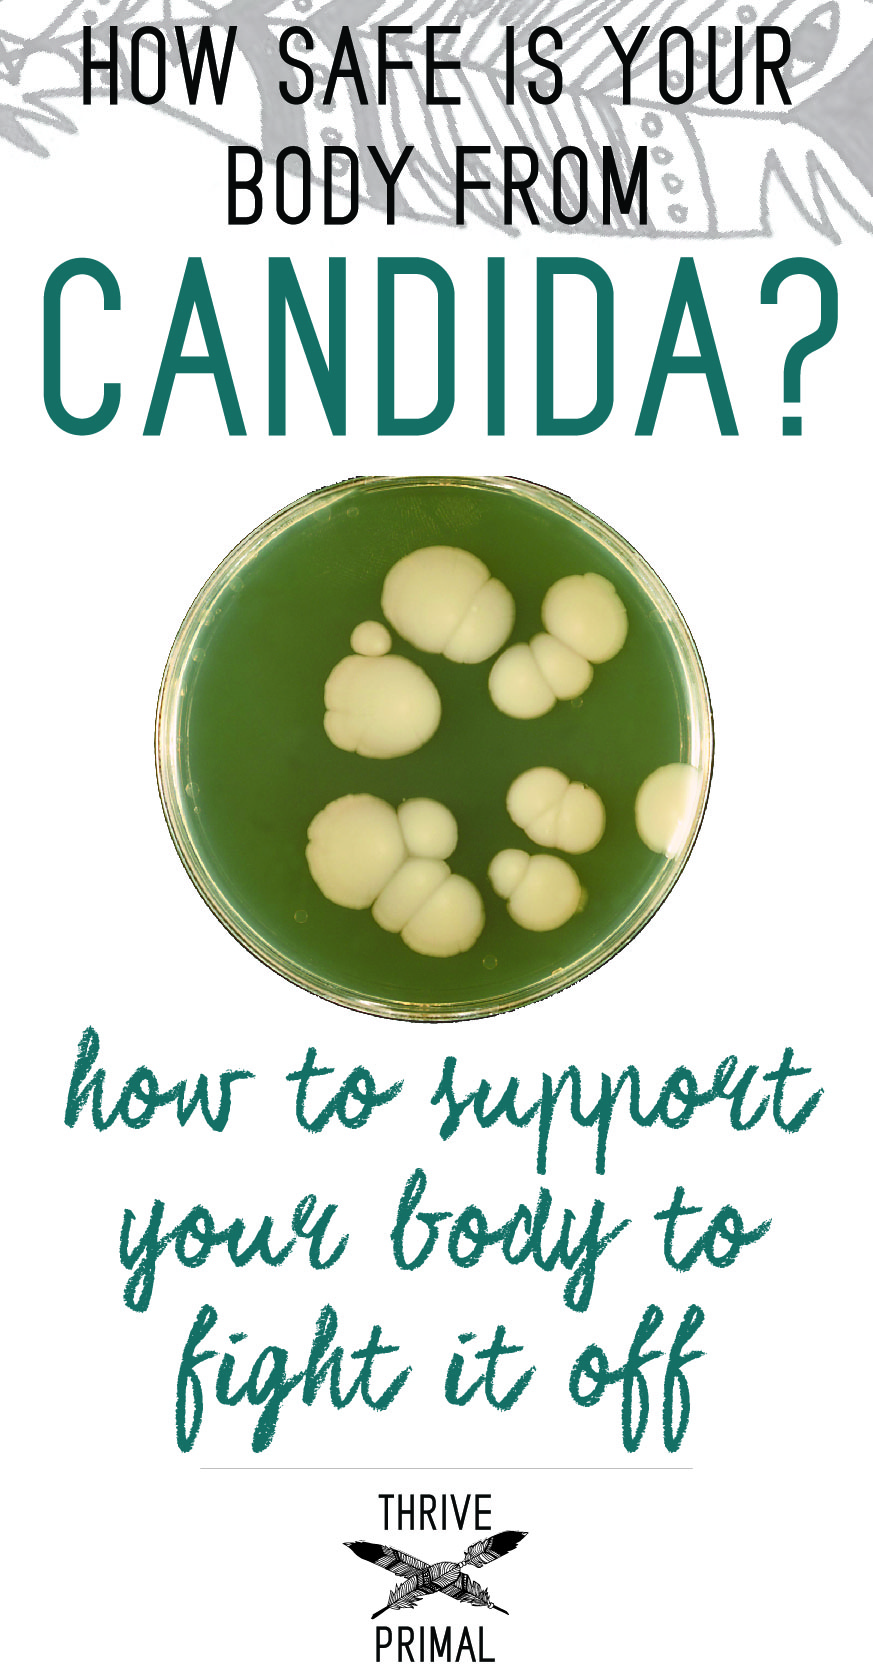 Thrive Primal - candida remedies and foods